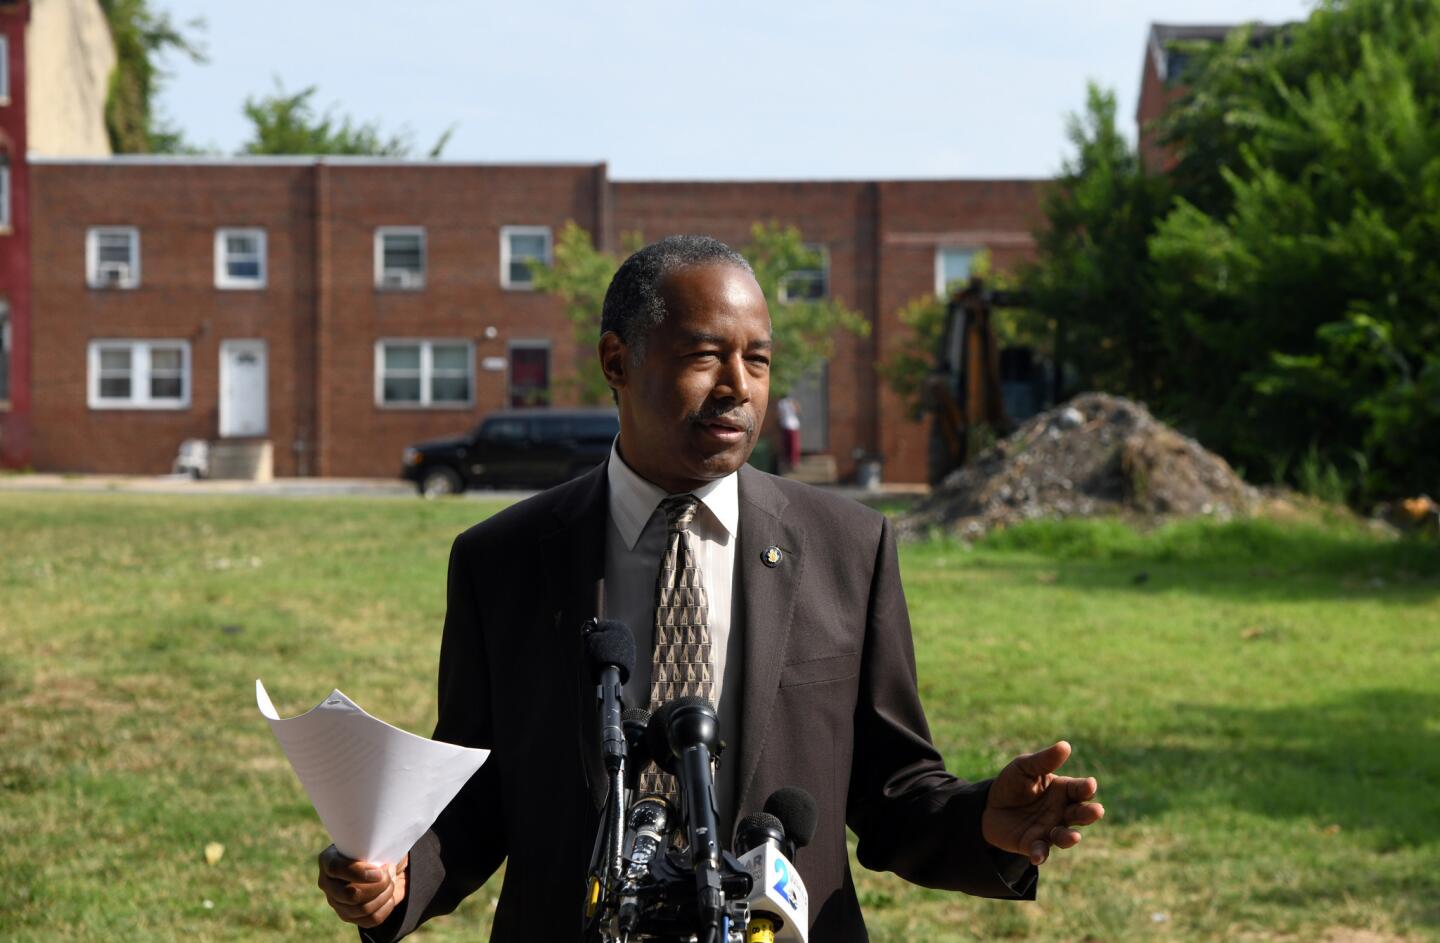 Dr. Ben Carson, Secretary of Housing and Urban Development, holds a press conference in West Baltimore regarding federal Opportunity Zones.